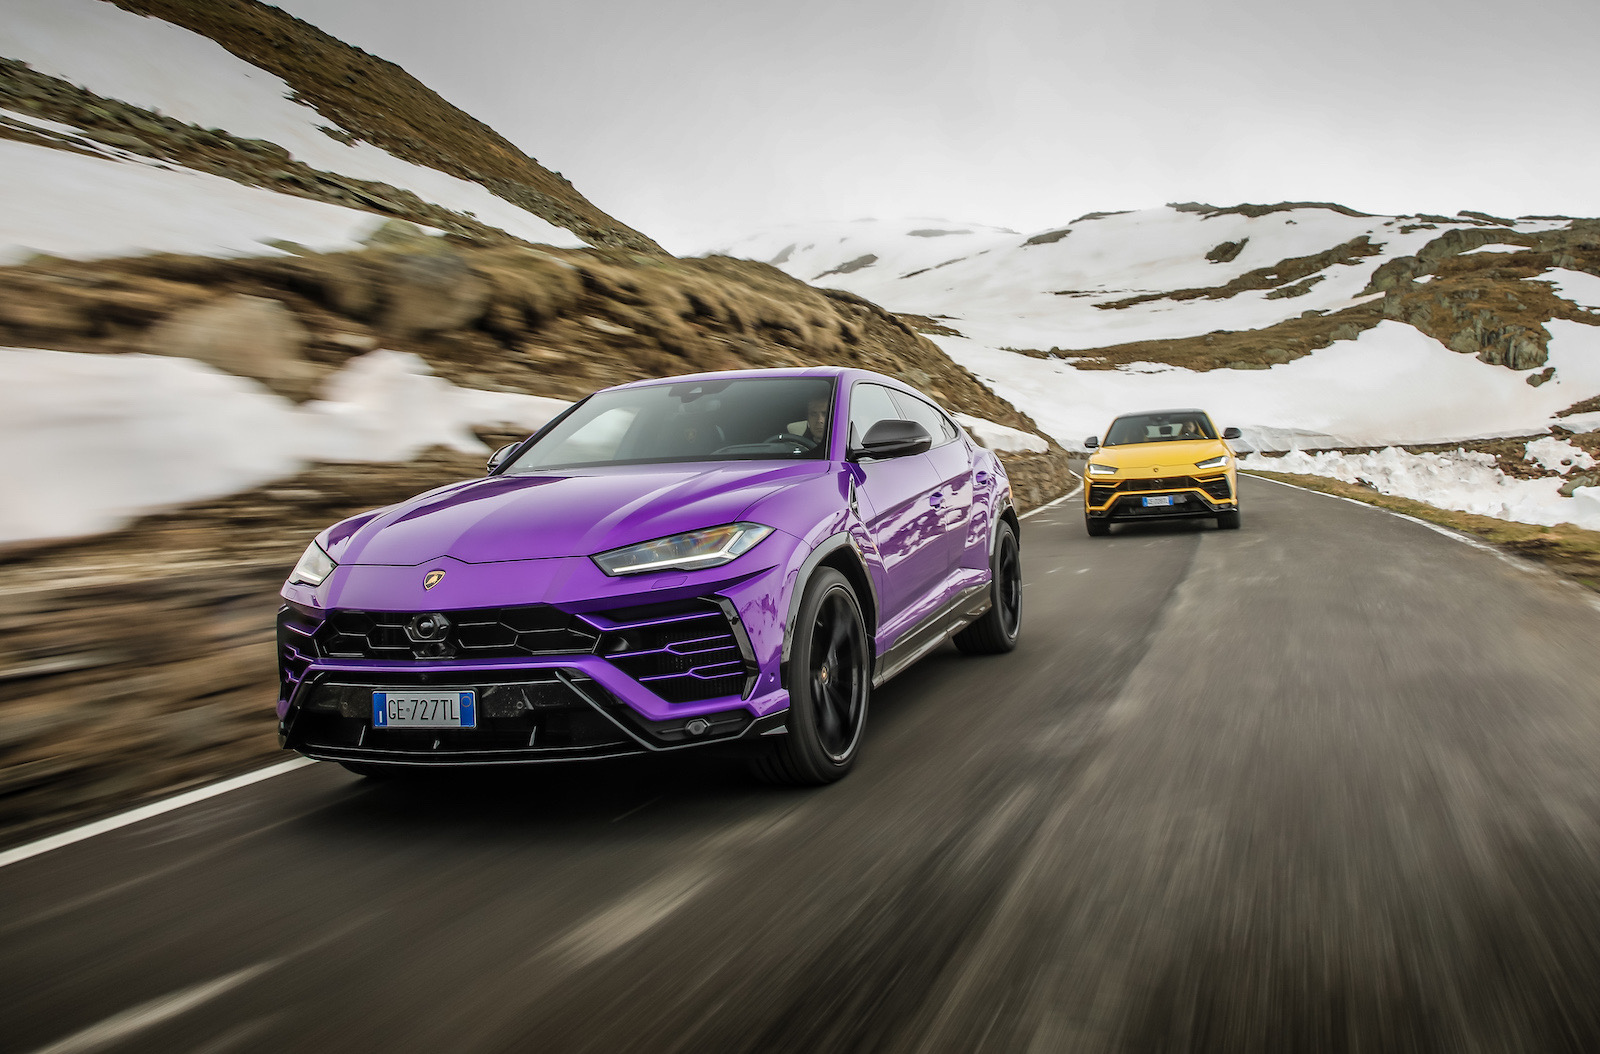 Lamborghini posts record deliveries in first 9 months of 2021